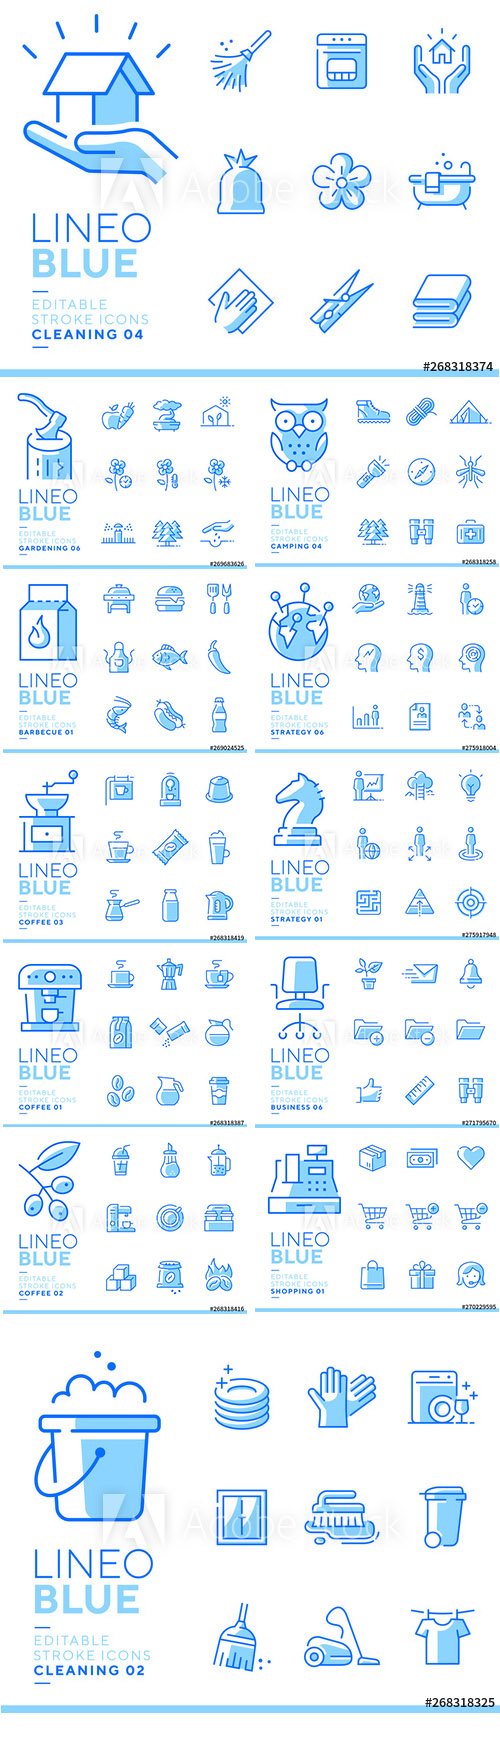 Lineo Blue - Line Icons Vector Pack Vol 3